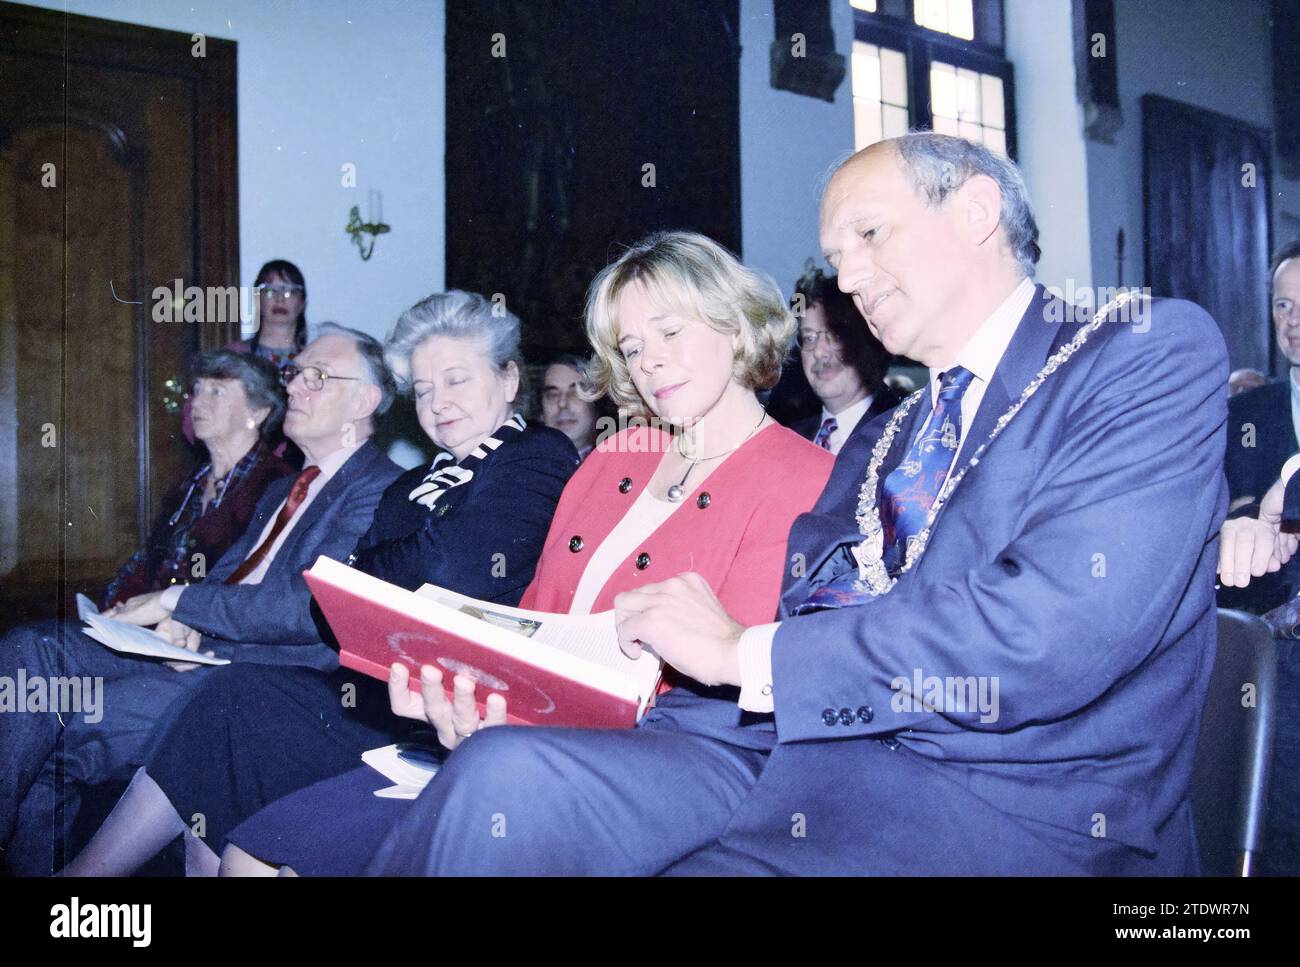 Presentation of book Haarlem 750 years to (former) mayors and (former) commissioners of the Queen in the town hall, Haarlem, Grote Markt, The Netherlands, 30-03-1995, Whizgle News from the Past, Tailored for the Future. Explore historical narratives, Dutch The Netherlands agency image with a modern perspective, bridging the gap between yesterday's events and tomorrow's insights. A timeless journey shaping the stories that shape our future Stock Photo